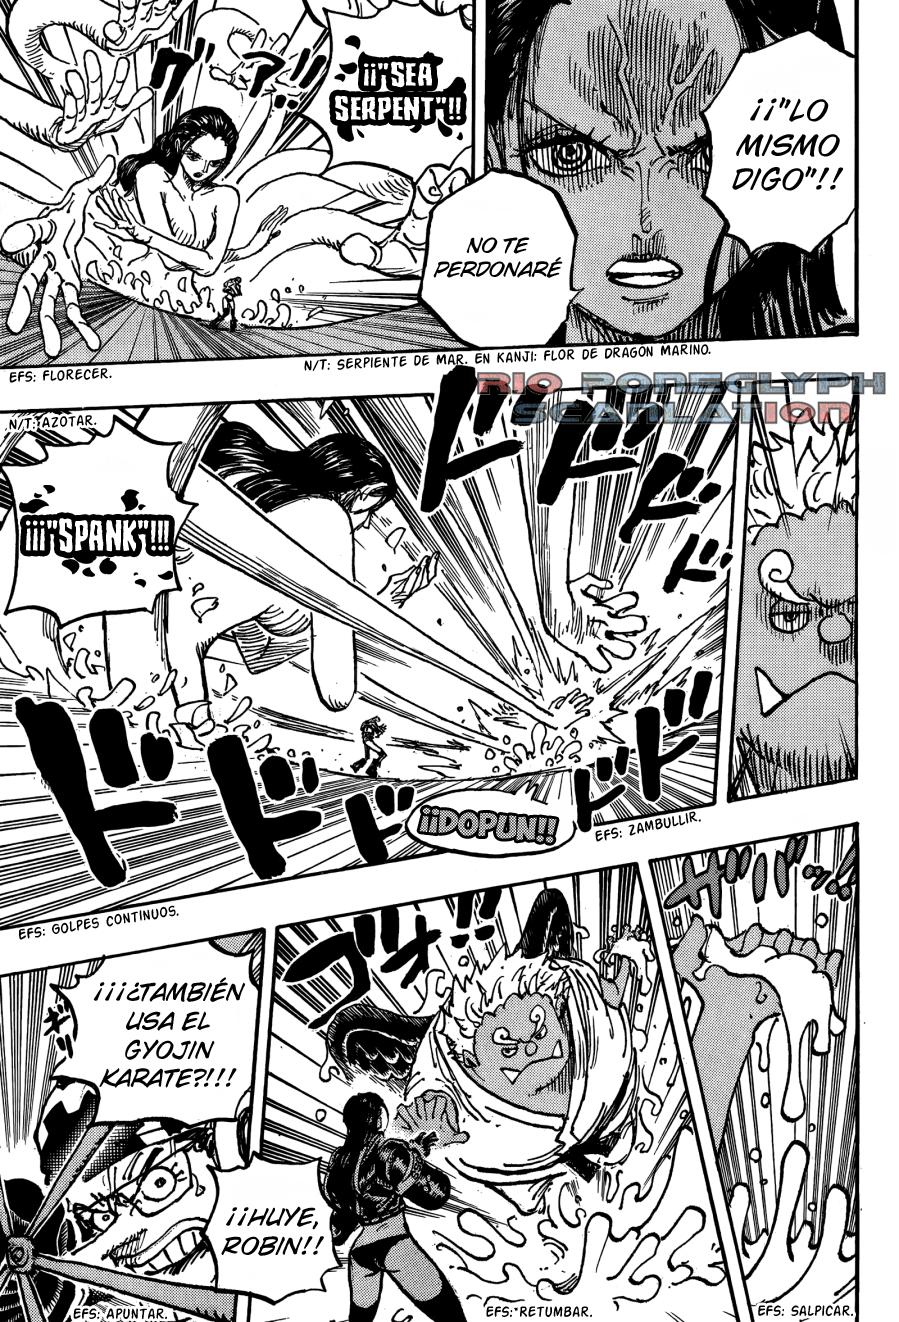 One Piece Chapter 1073 first theory is out! Know all important details